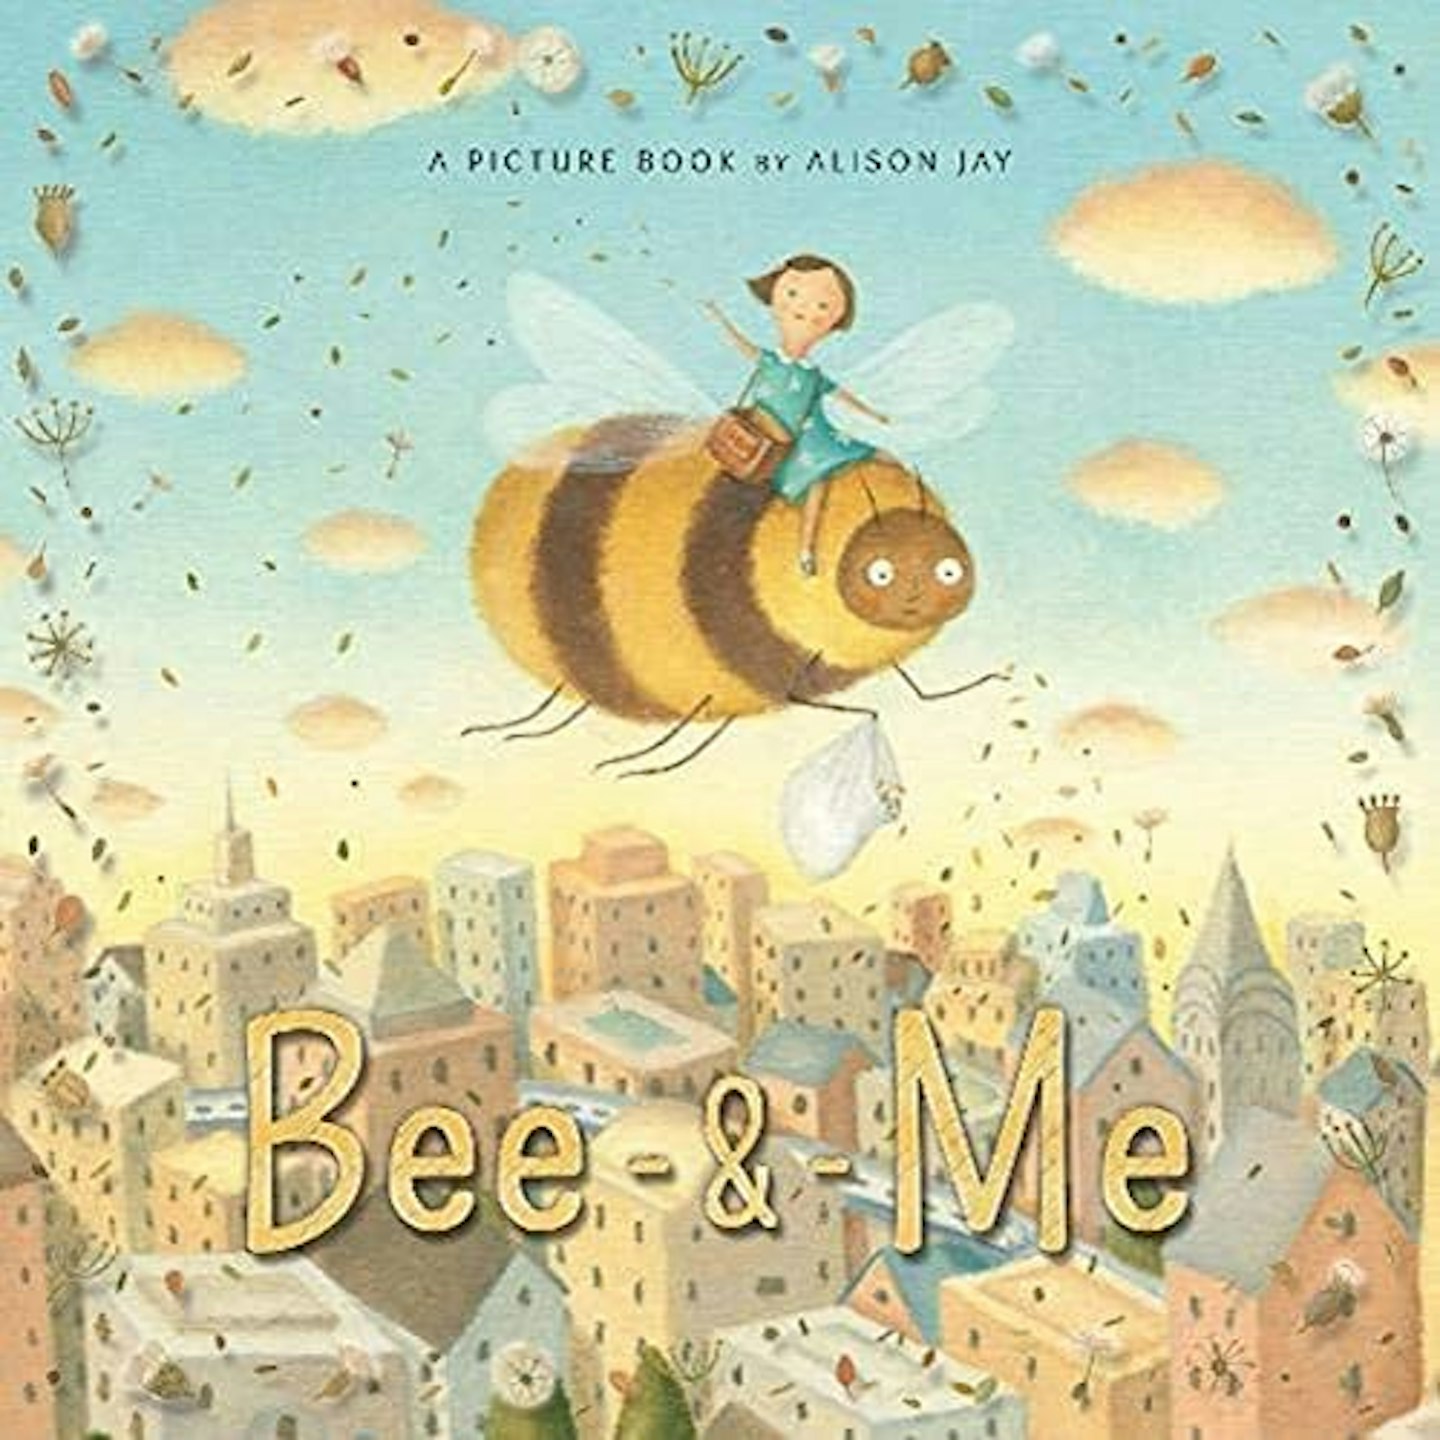 Bee and Me by Alison Jay